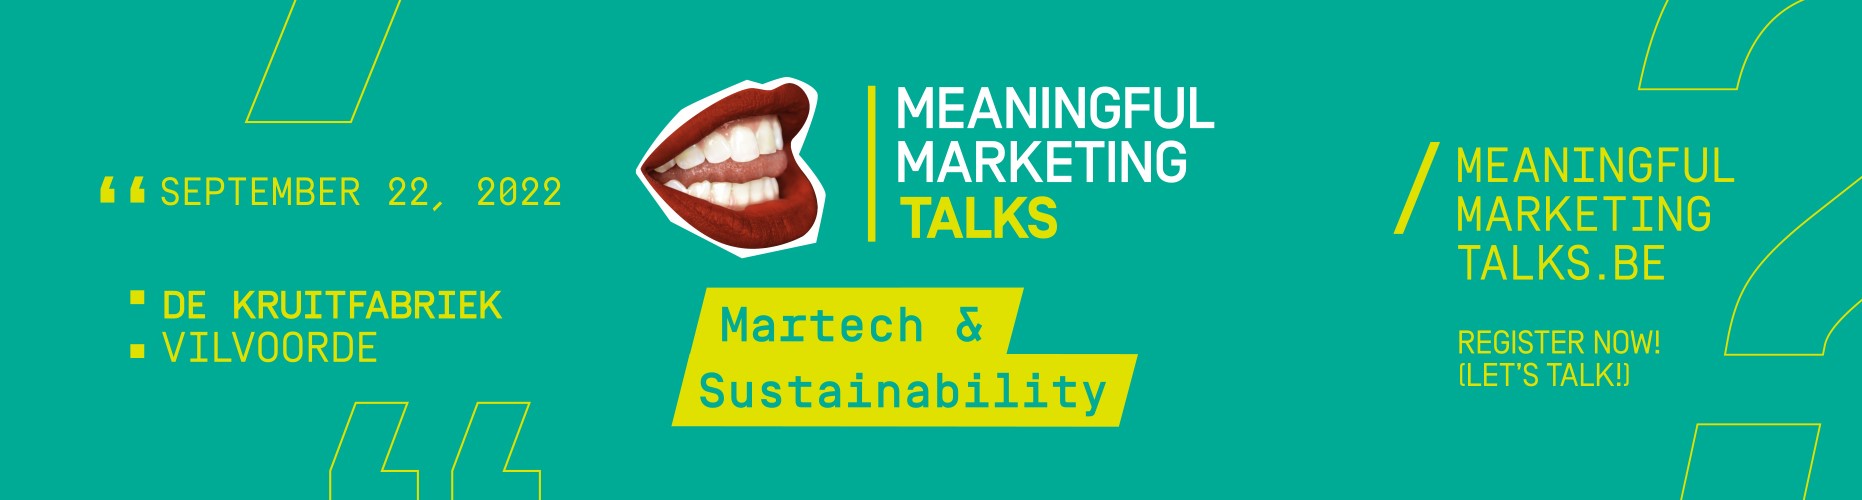 BAM MMT Martech&amp;Sustainability 1862x500 002